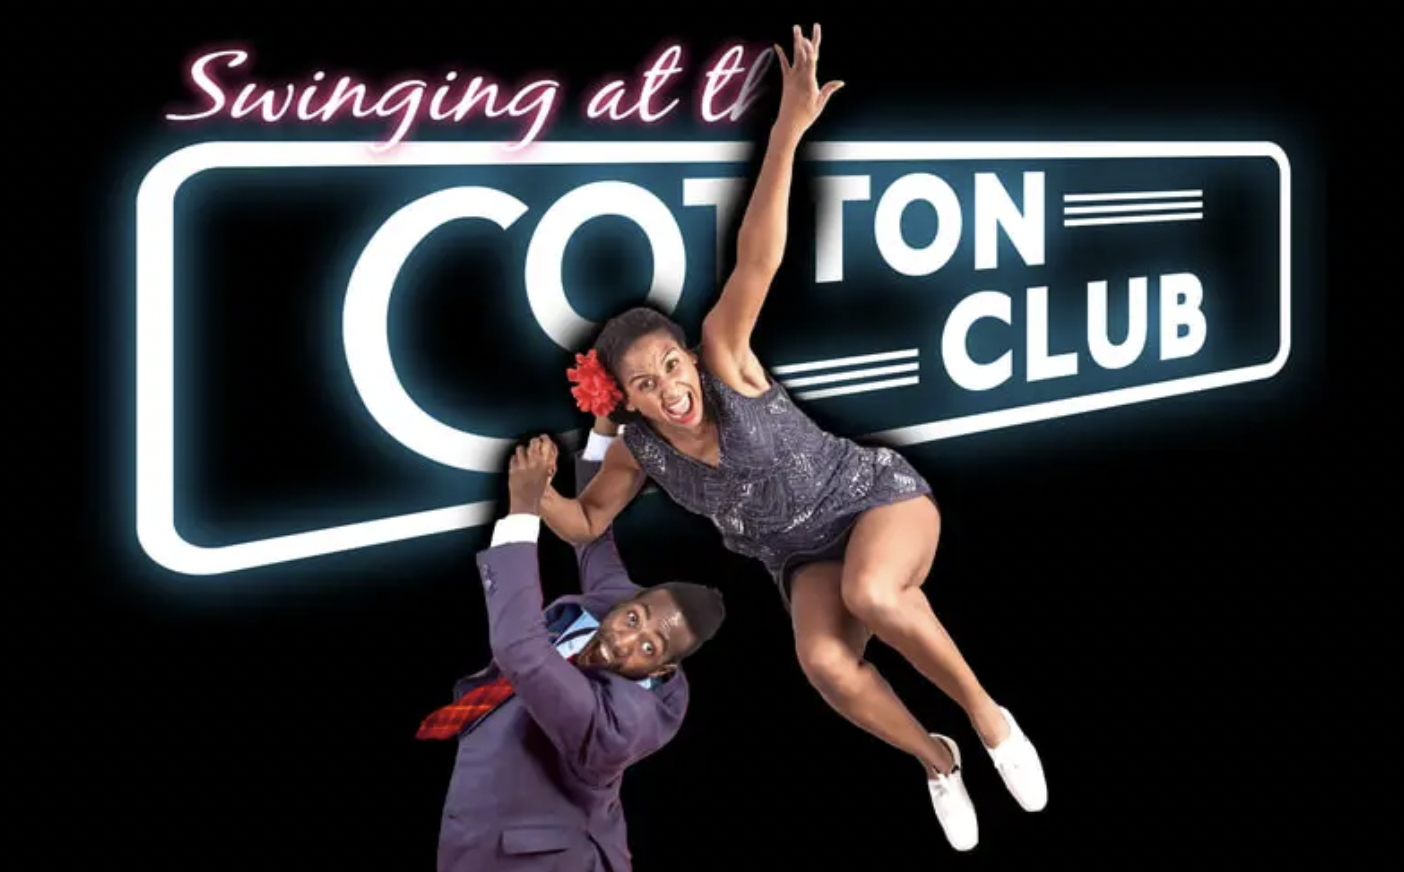 SWINGING AT THE COTTON CLUB AT THE FESTIVAL THEATRE